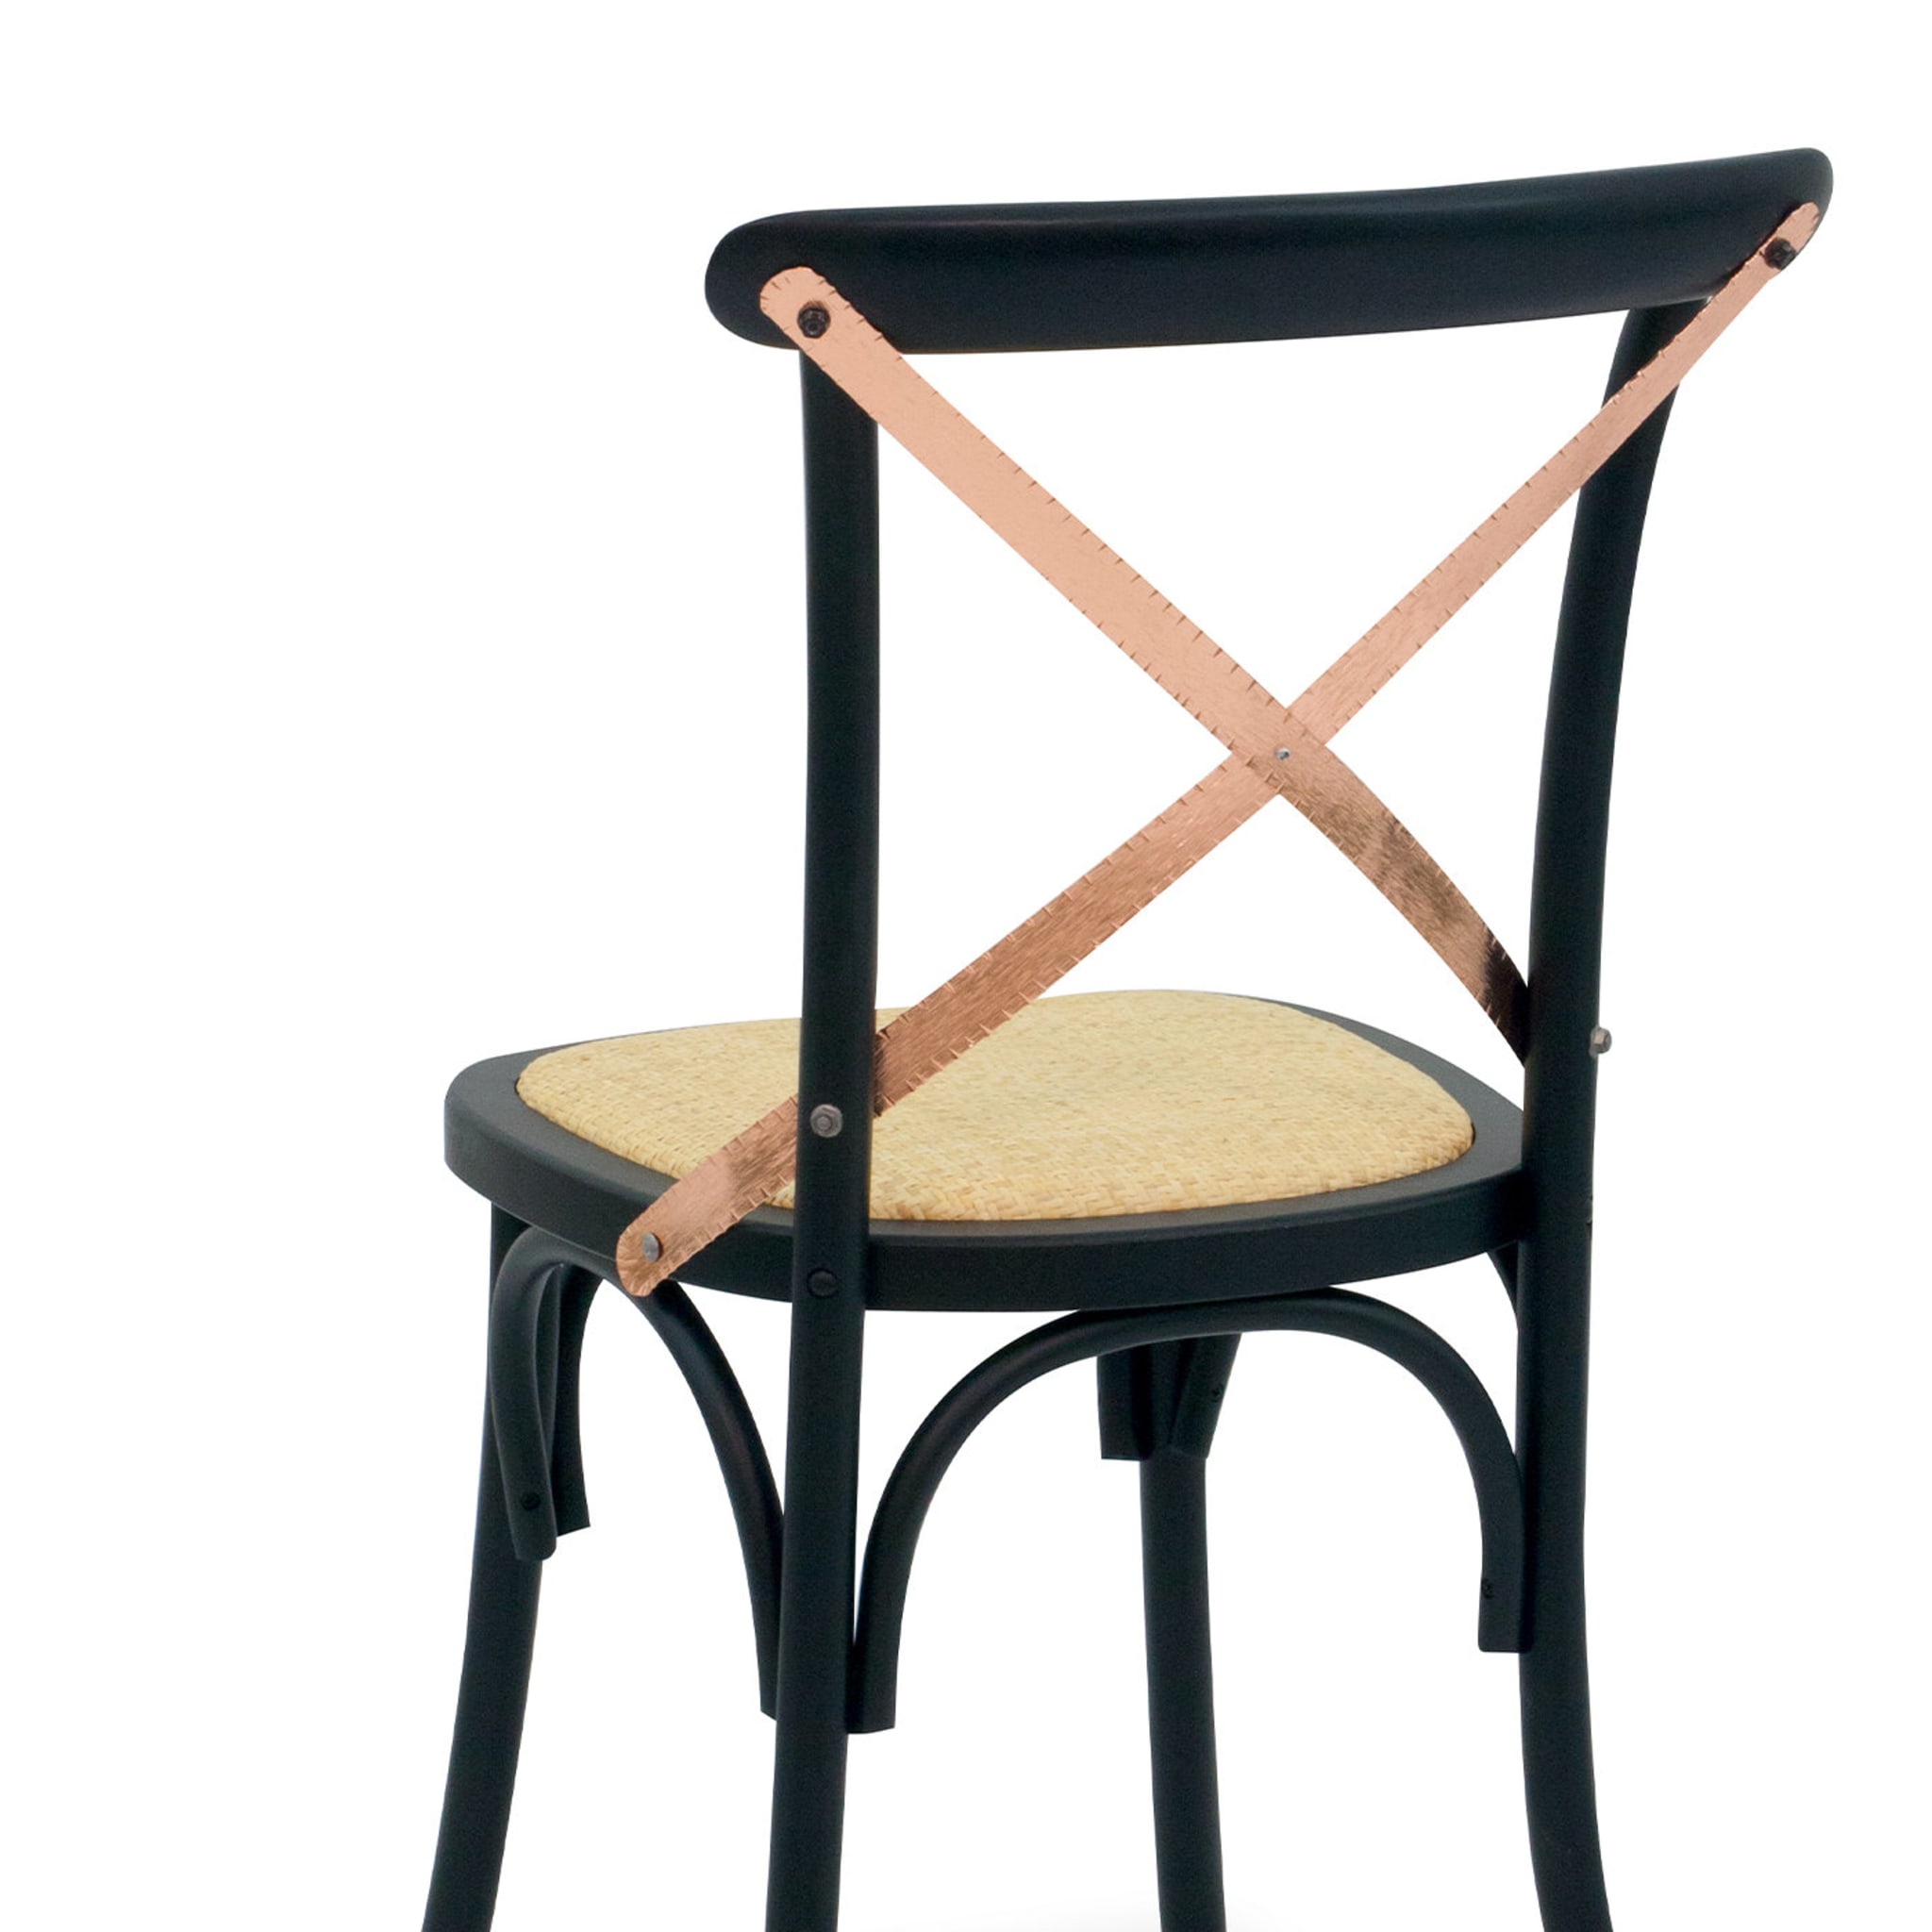 Ciao Cuivre Set of 2 Copper Chairs - Alternative view 3